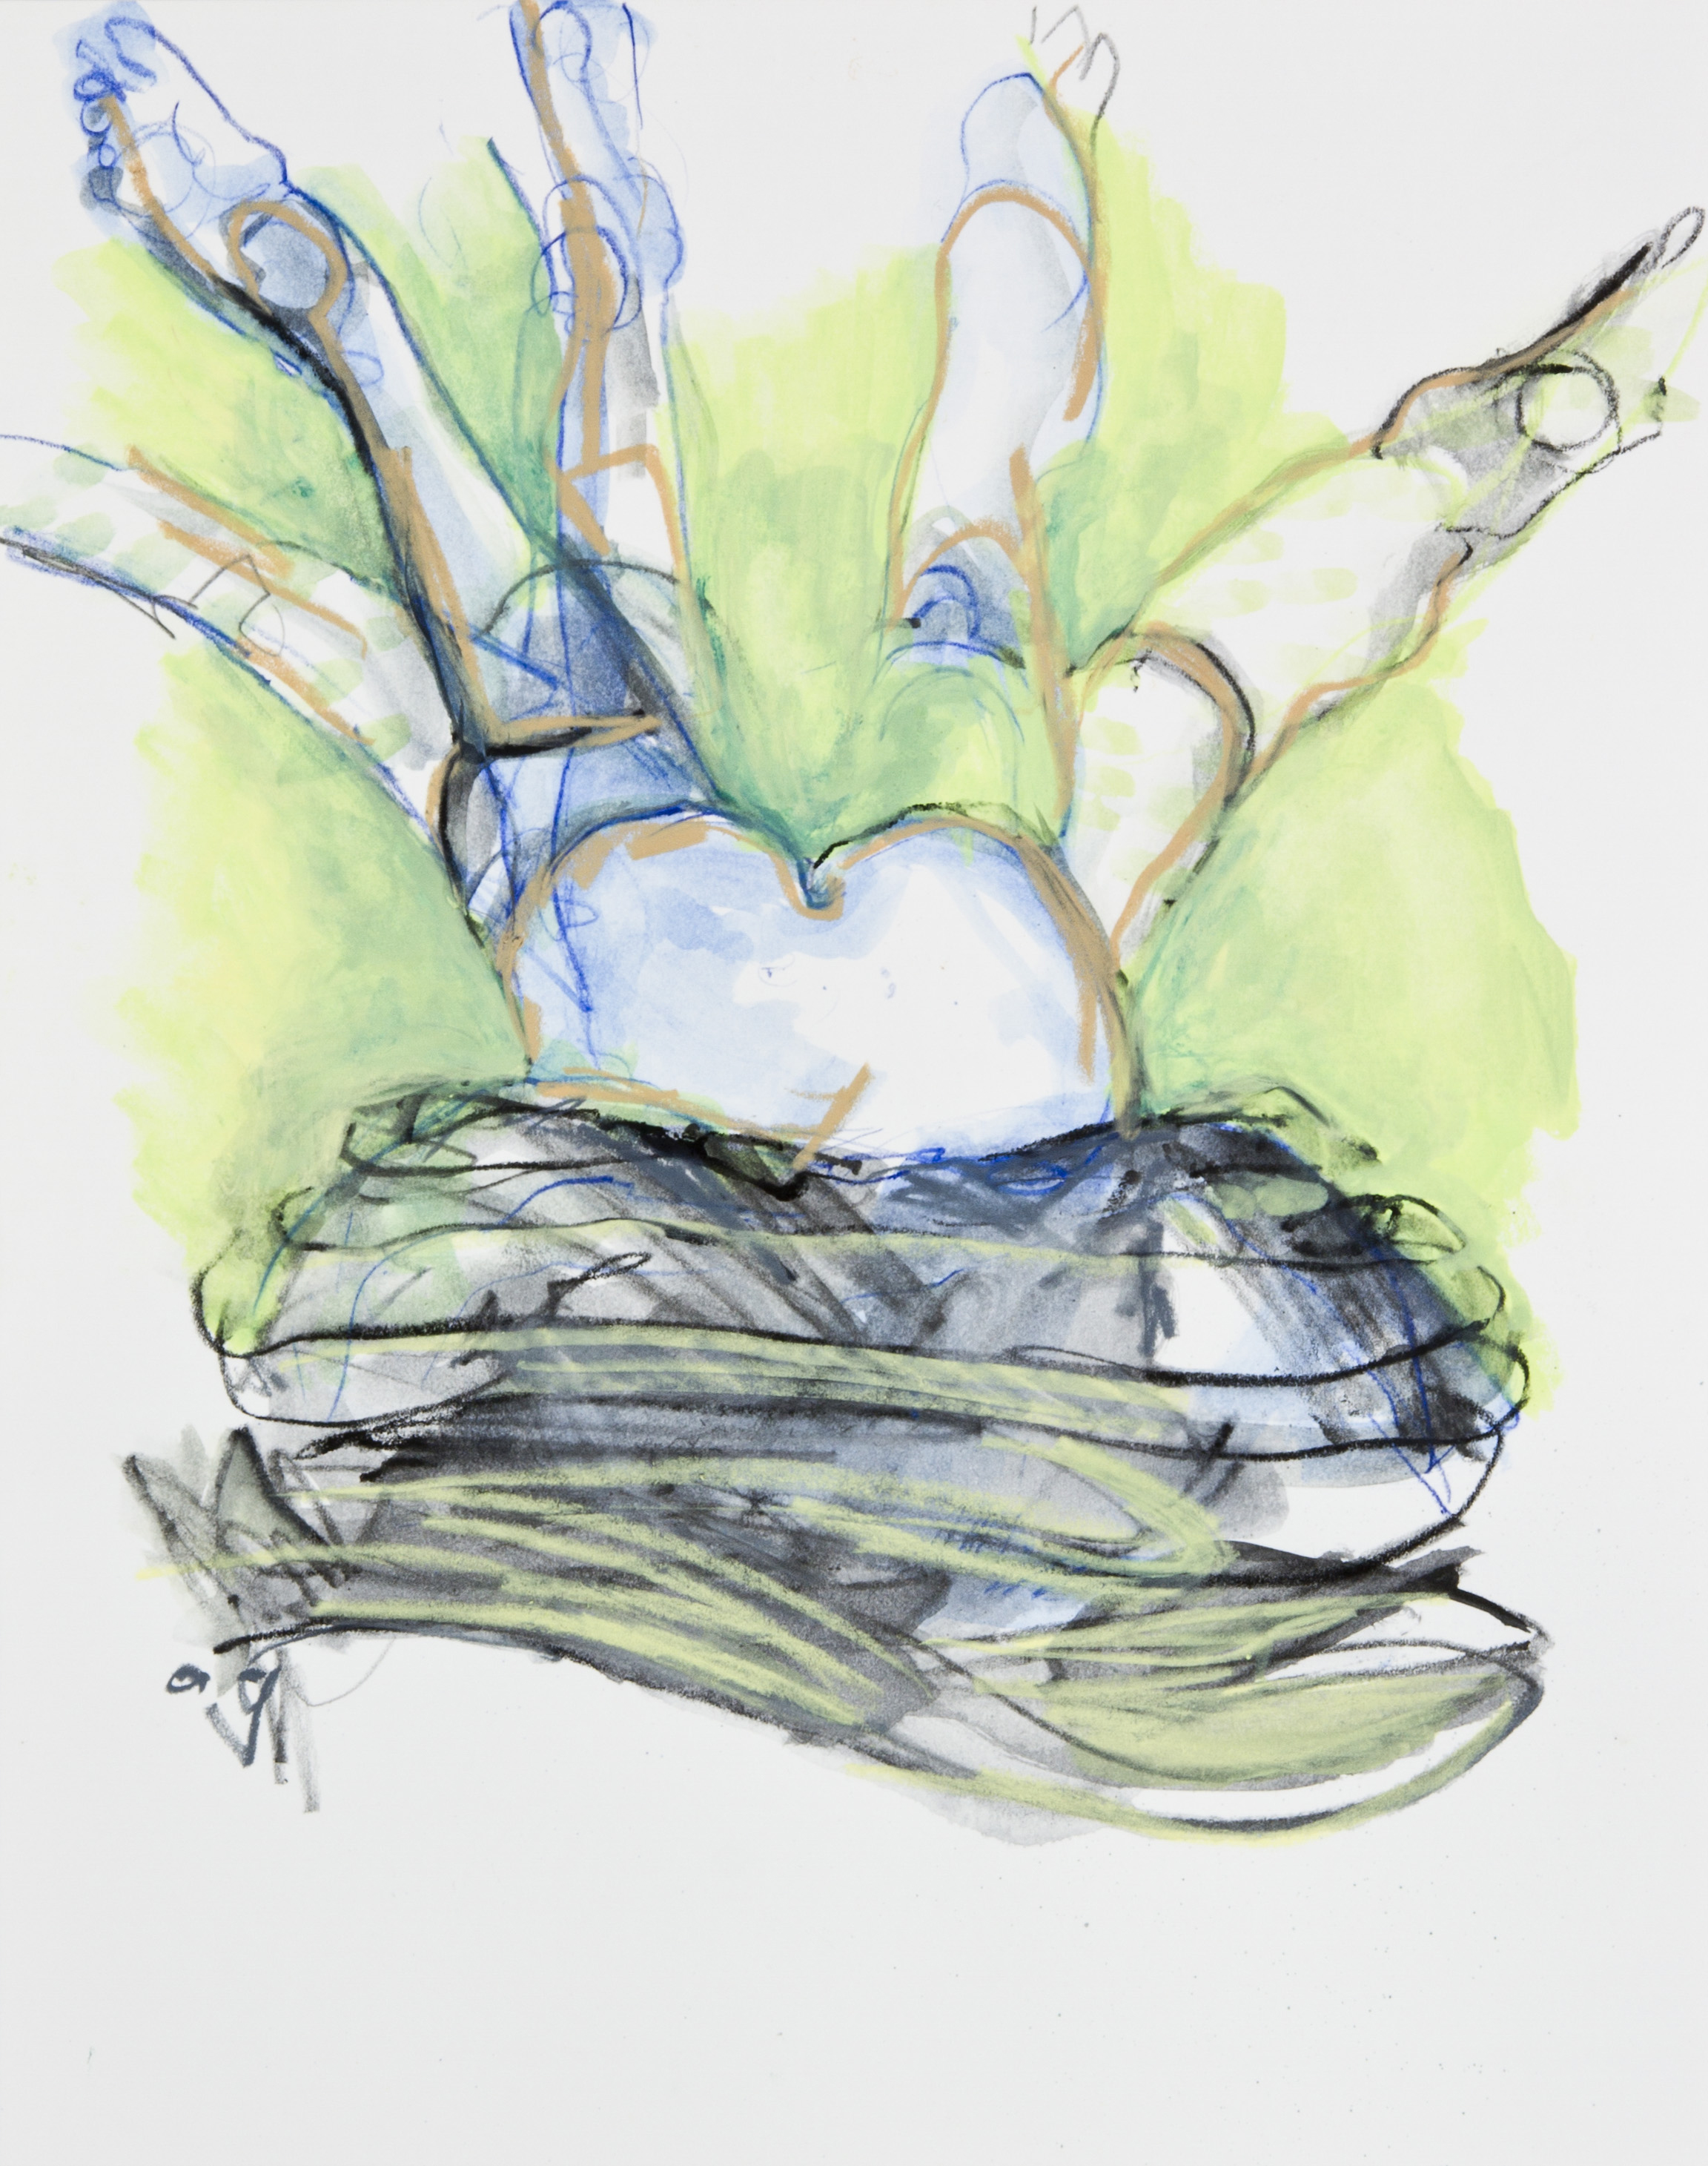 Wriggle Room, 2013, graphite, crayon and watercolor pencil on paper, 11x14 inches